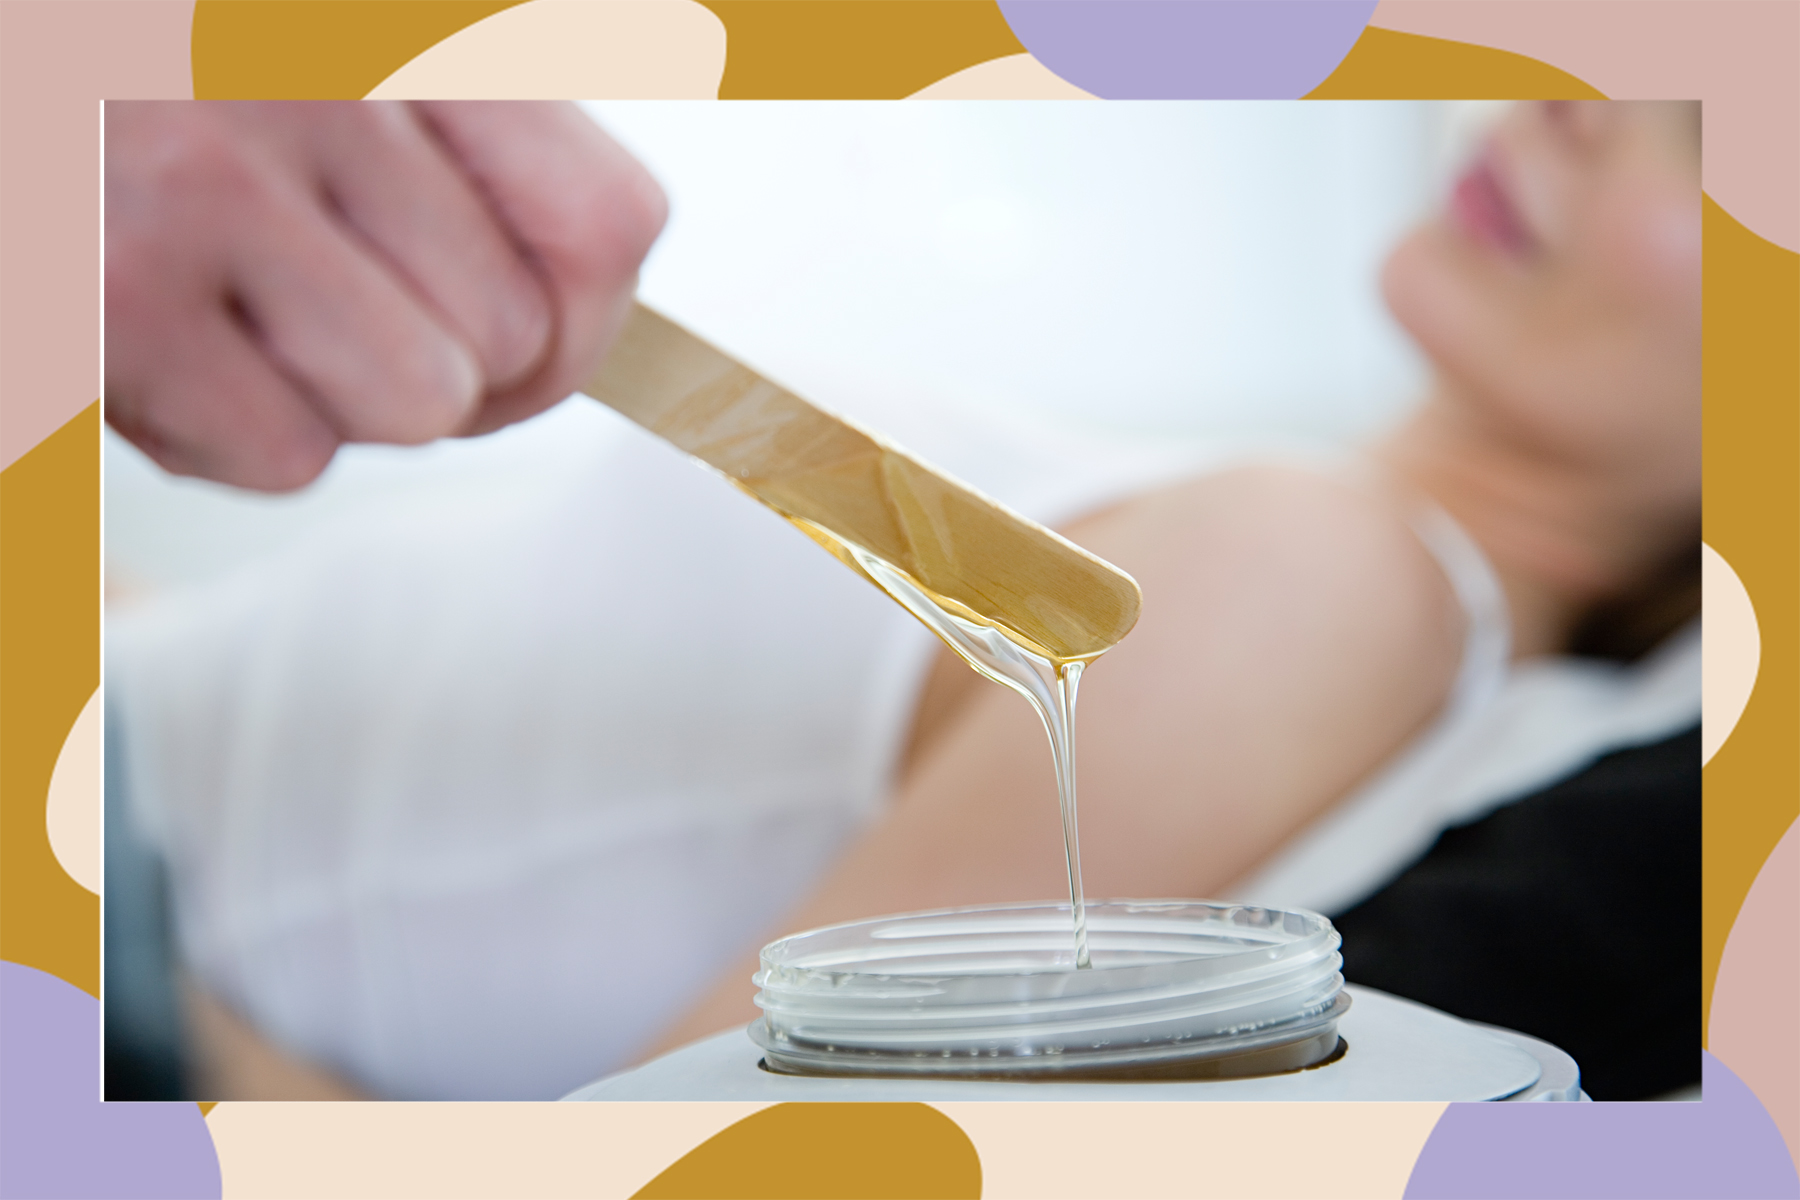 Bikini Wax Aftercare - The Dos and Don'ts for Perfect Skin